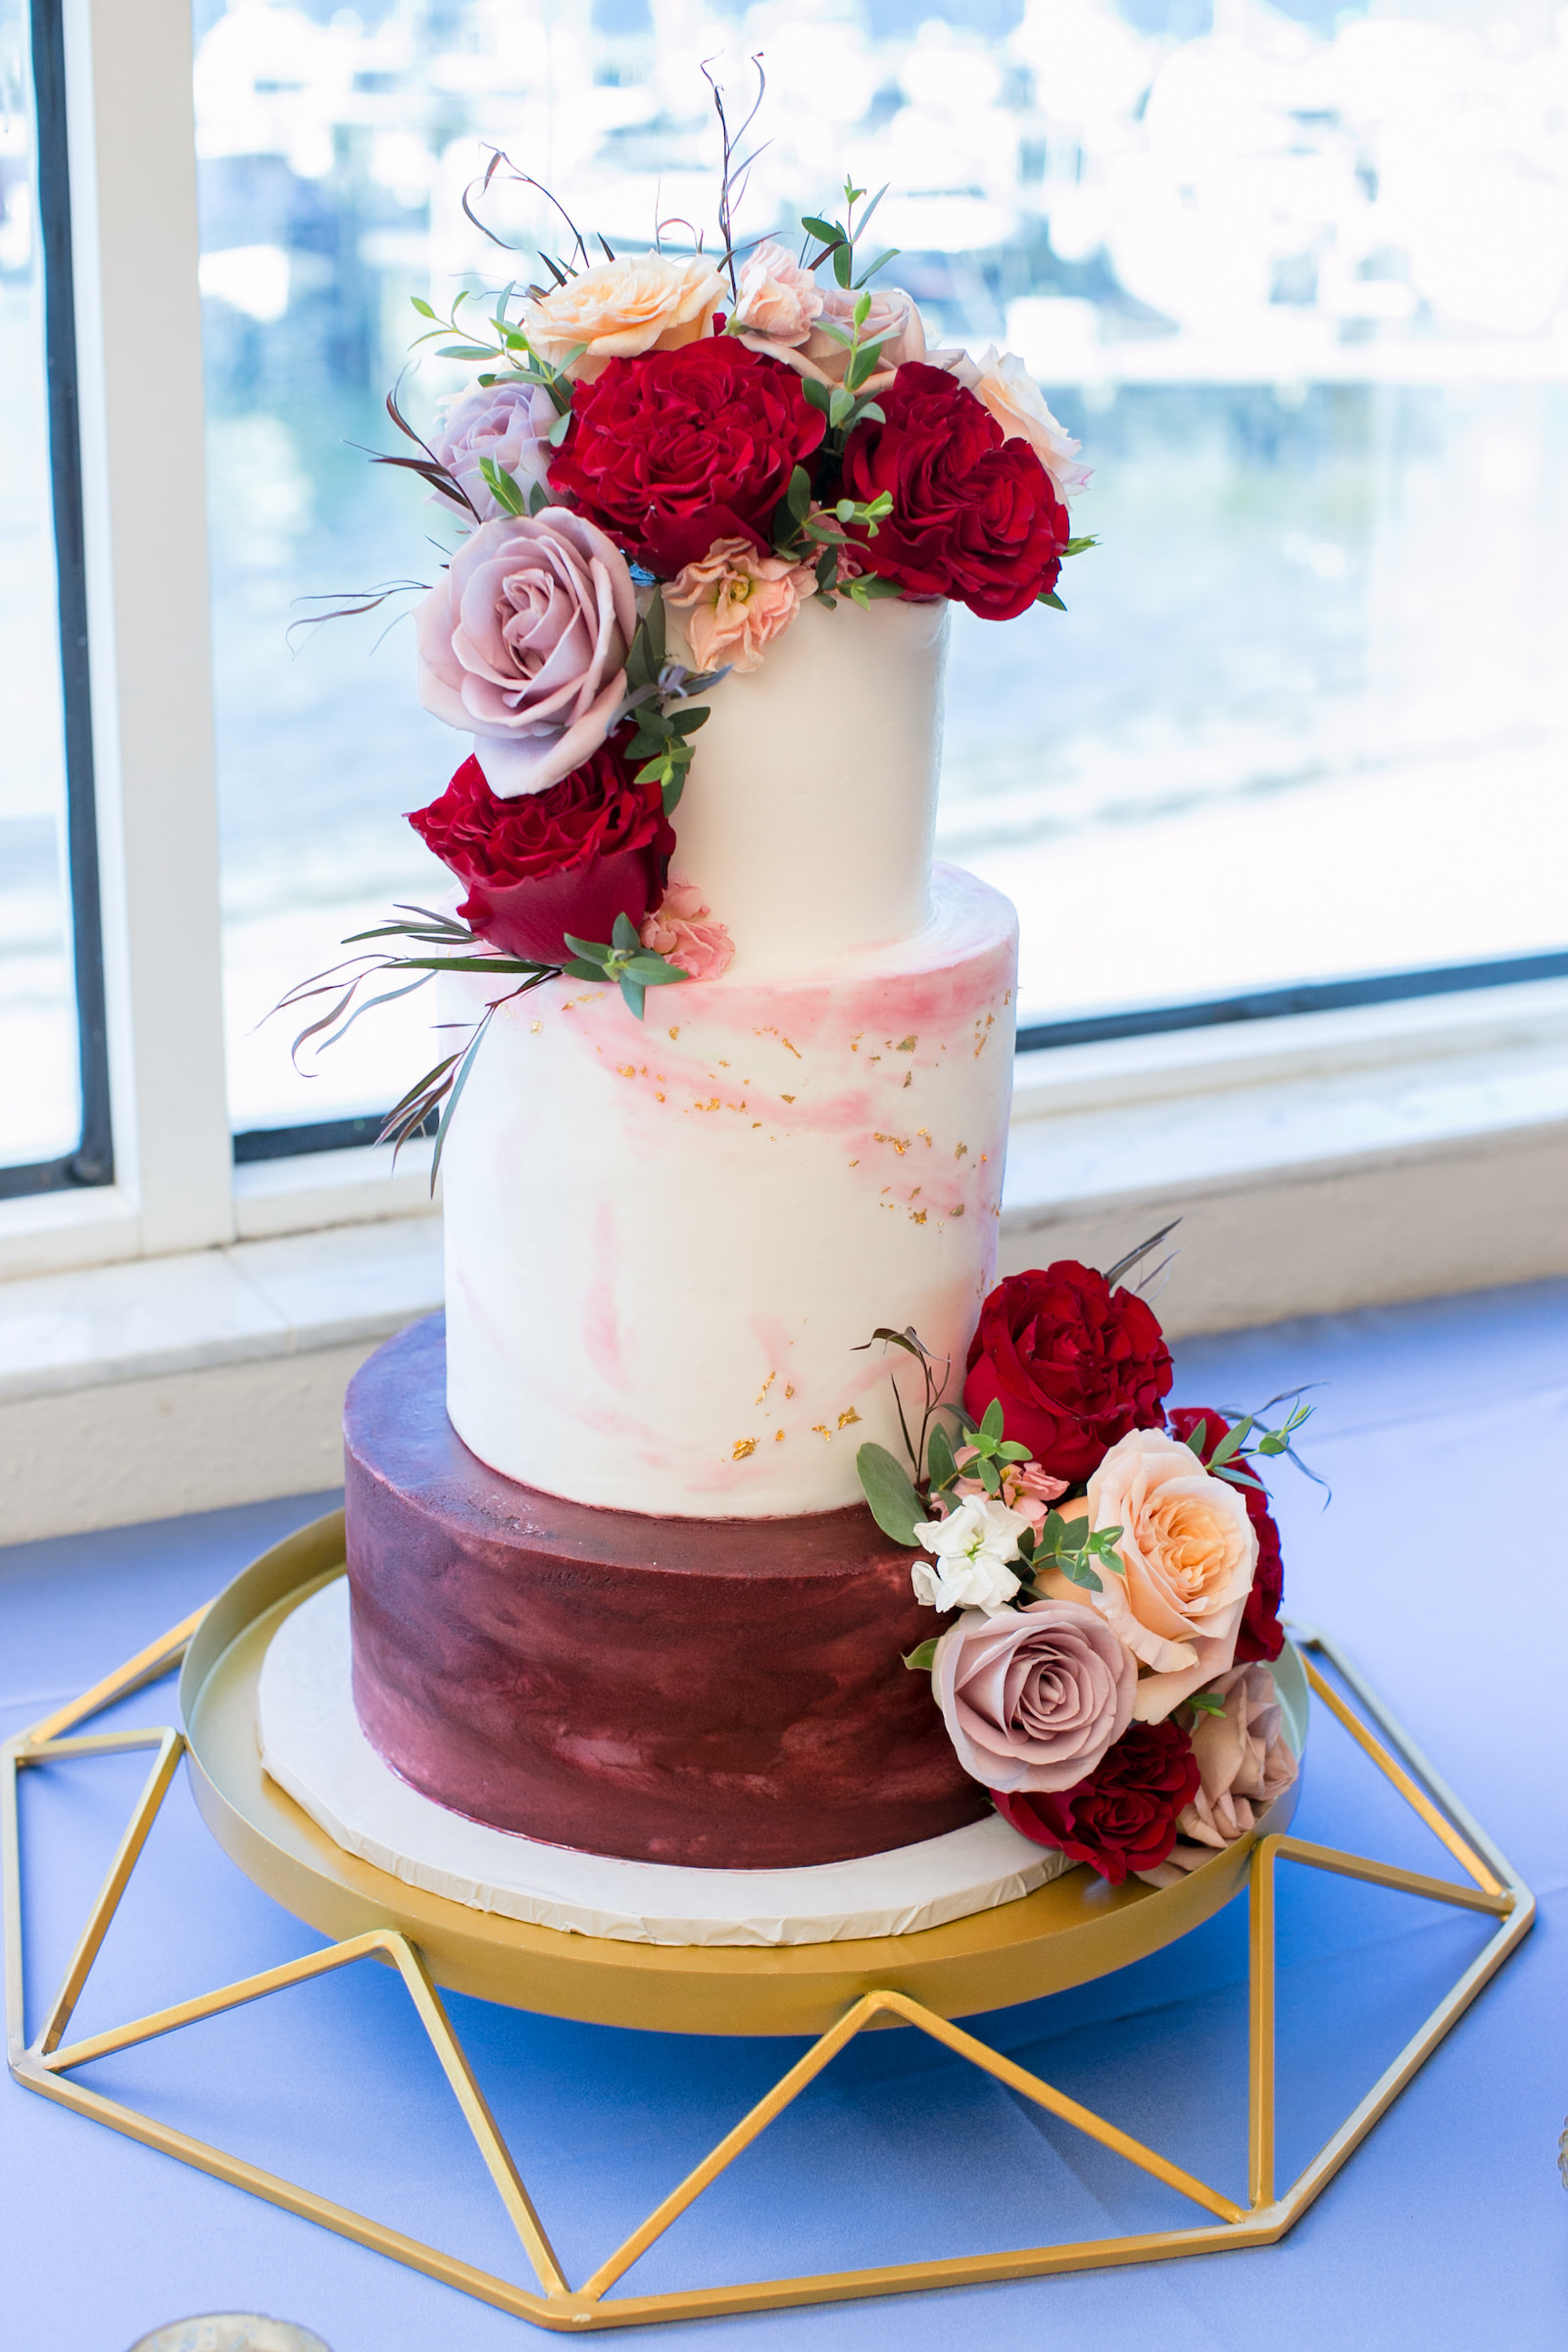 Three Tier Wedding Burgundy Red and White Wedding Cake, Real Mauve, Blush Pink and Red Roses Cake Topper on Gold Geometric Stand | Tampa Bay Wedding Photographer Carrie Wildes Photography | Wedding Florist Iza’s Flowers